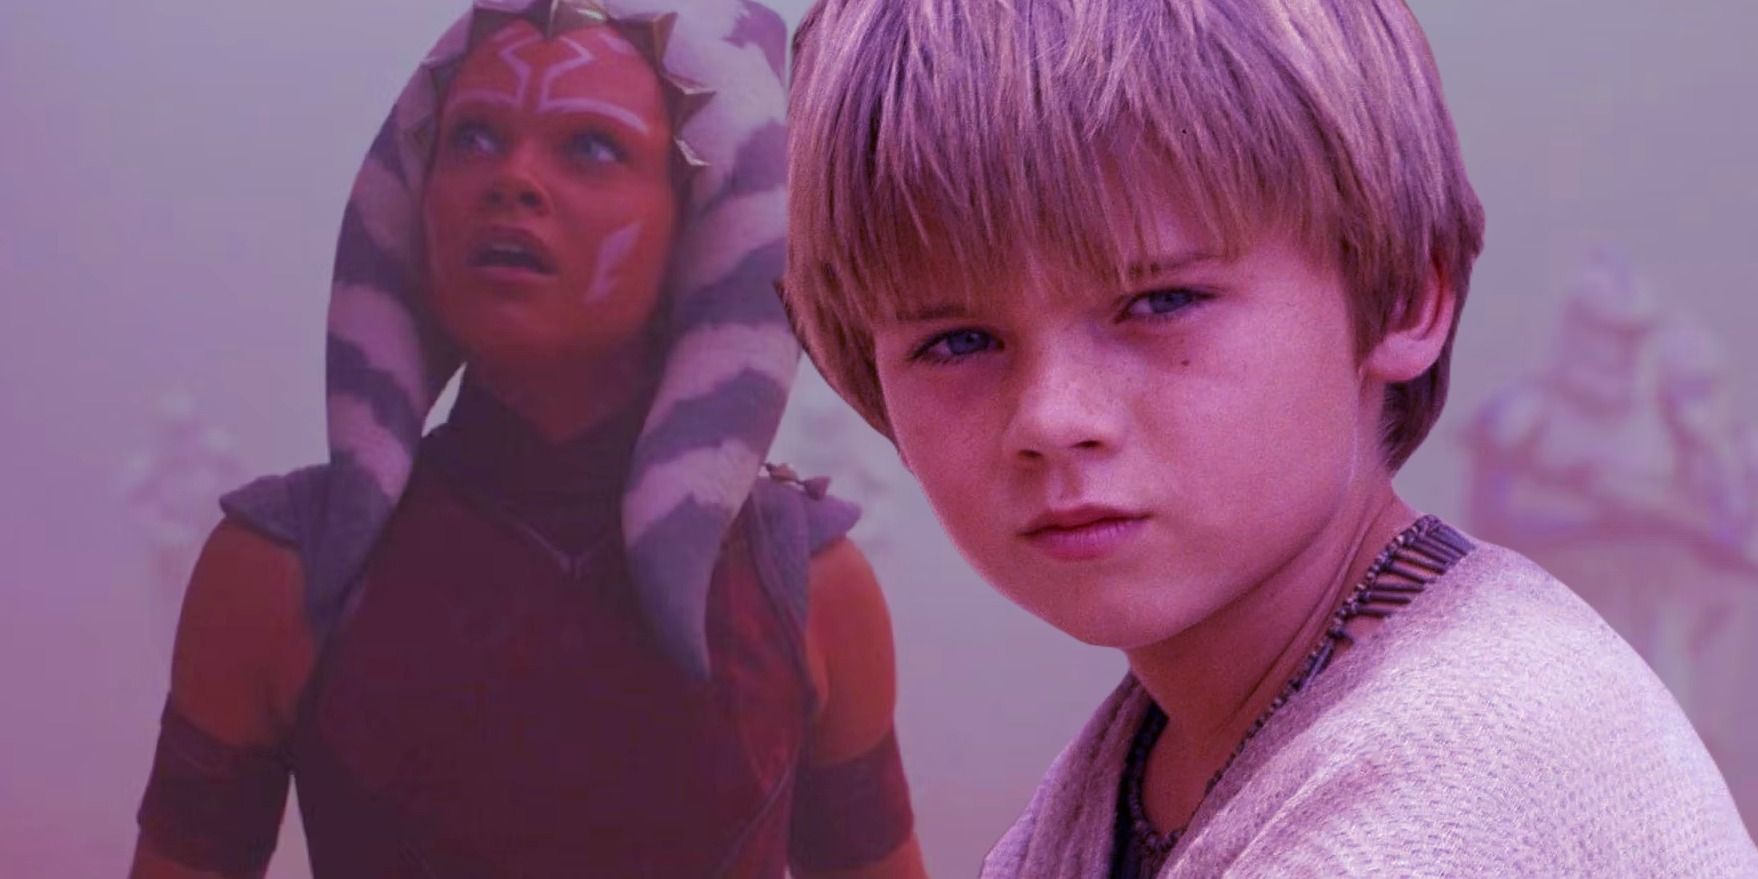 Young Ahsoka from the Ahsoka show looking surprised in the background and young Anakin from The Phantom Menace in the foreground